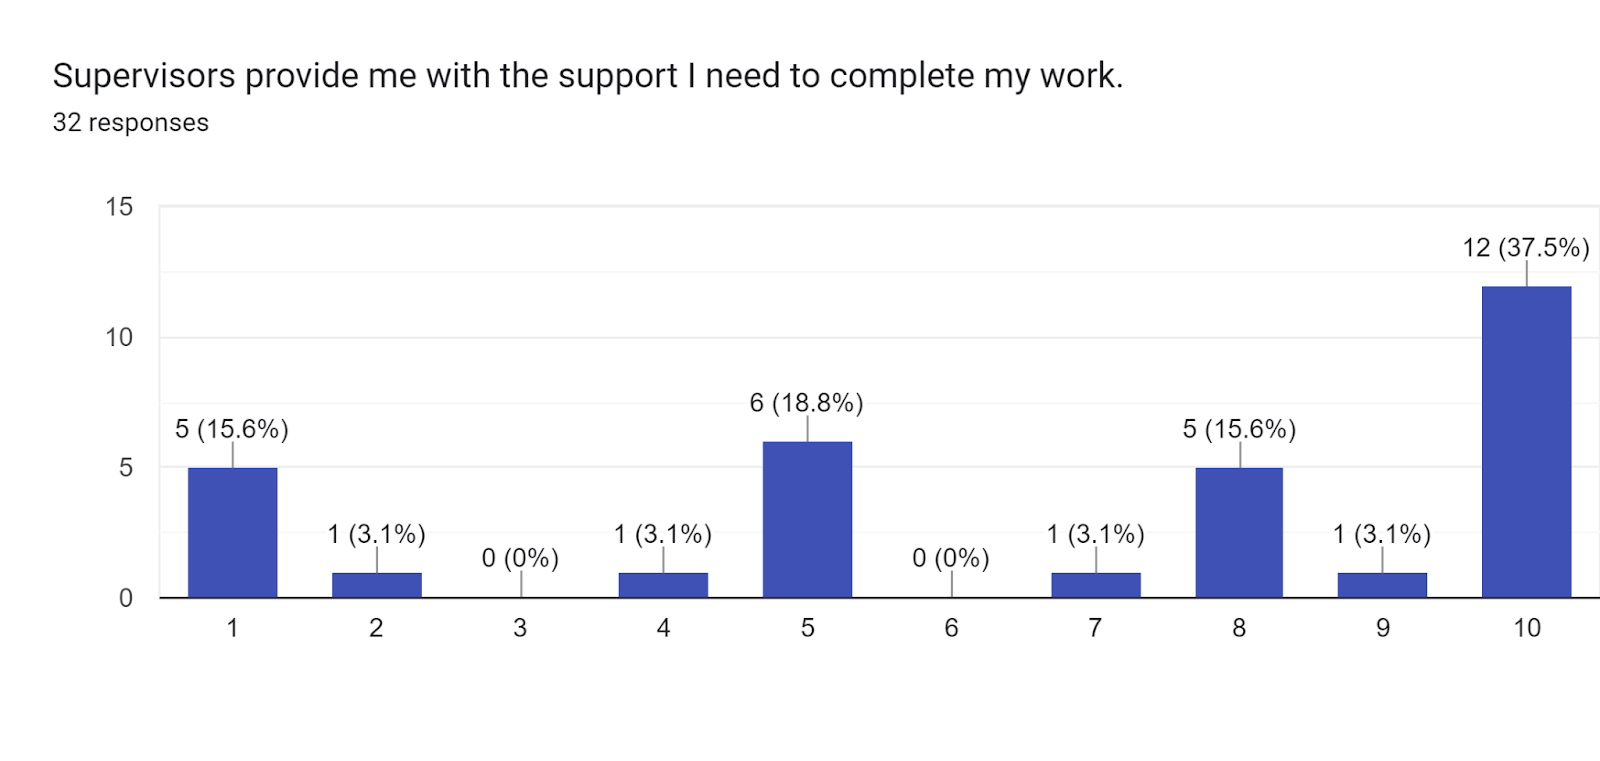 Forms response chart. Question title: Supervisors provide me with the support I need to complete my work.. Number of responses: 32 responses.